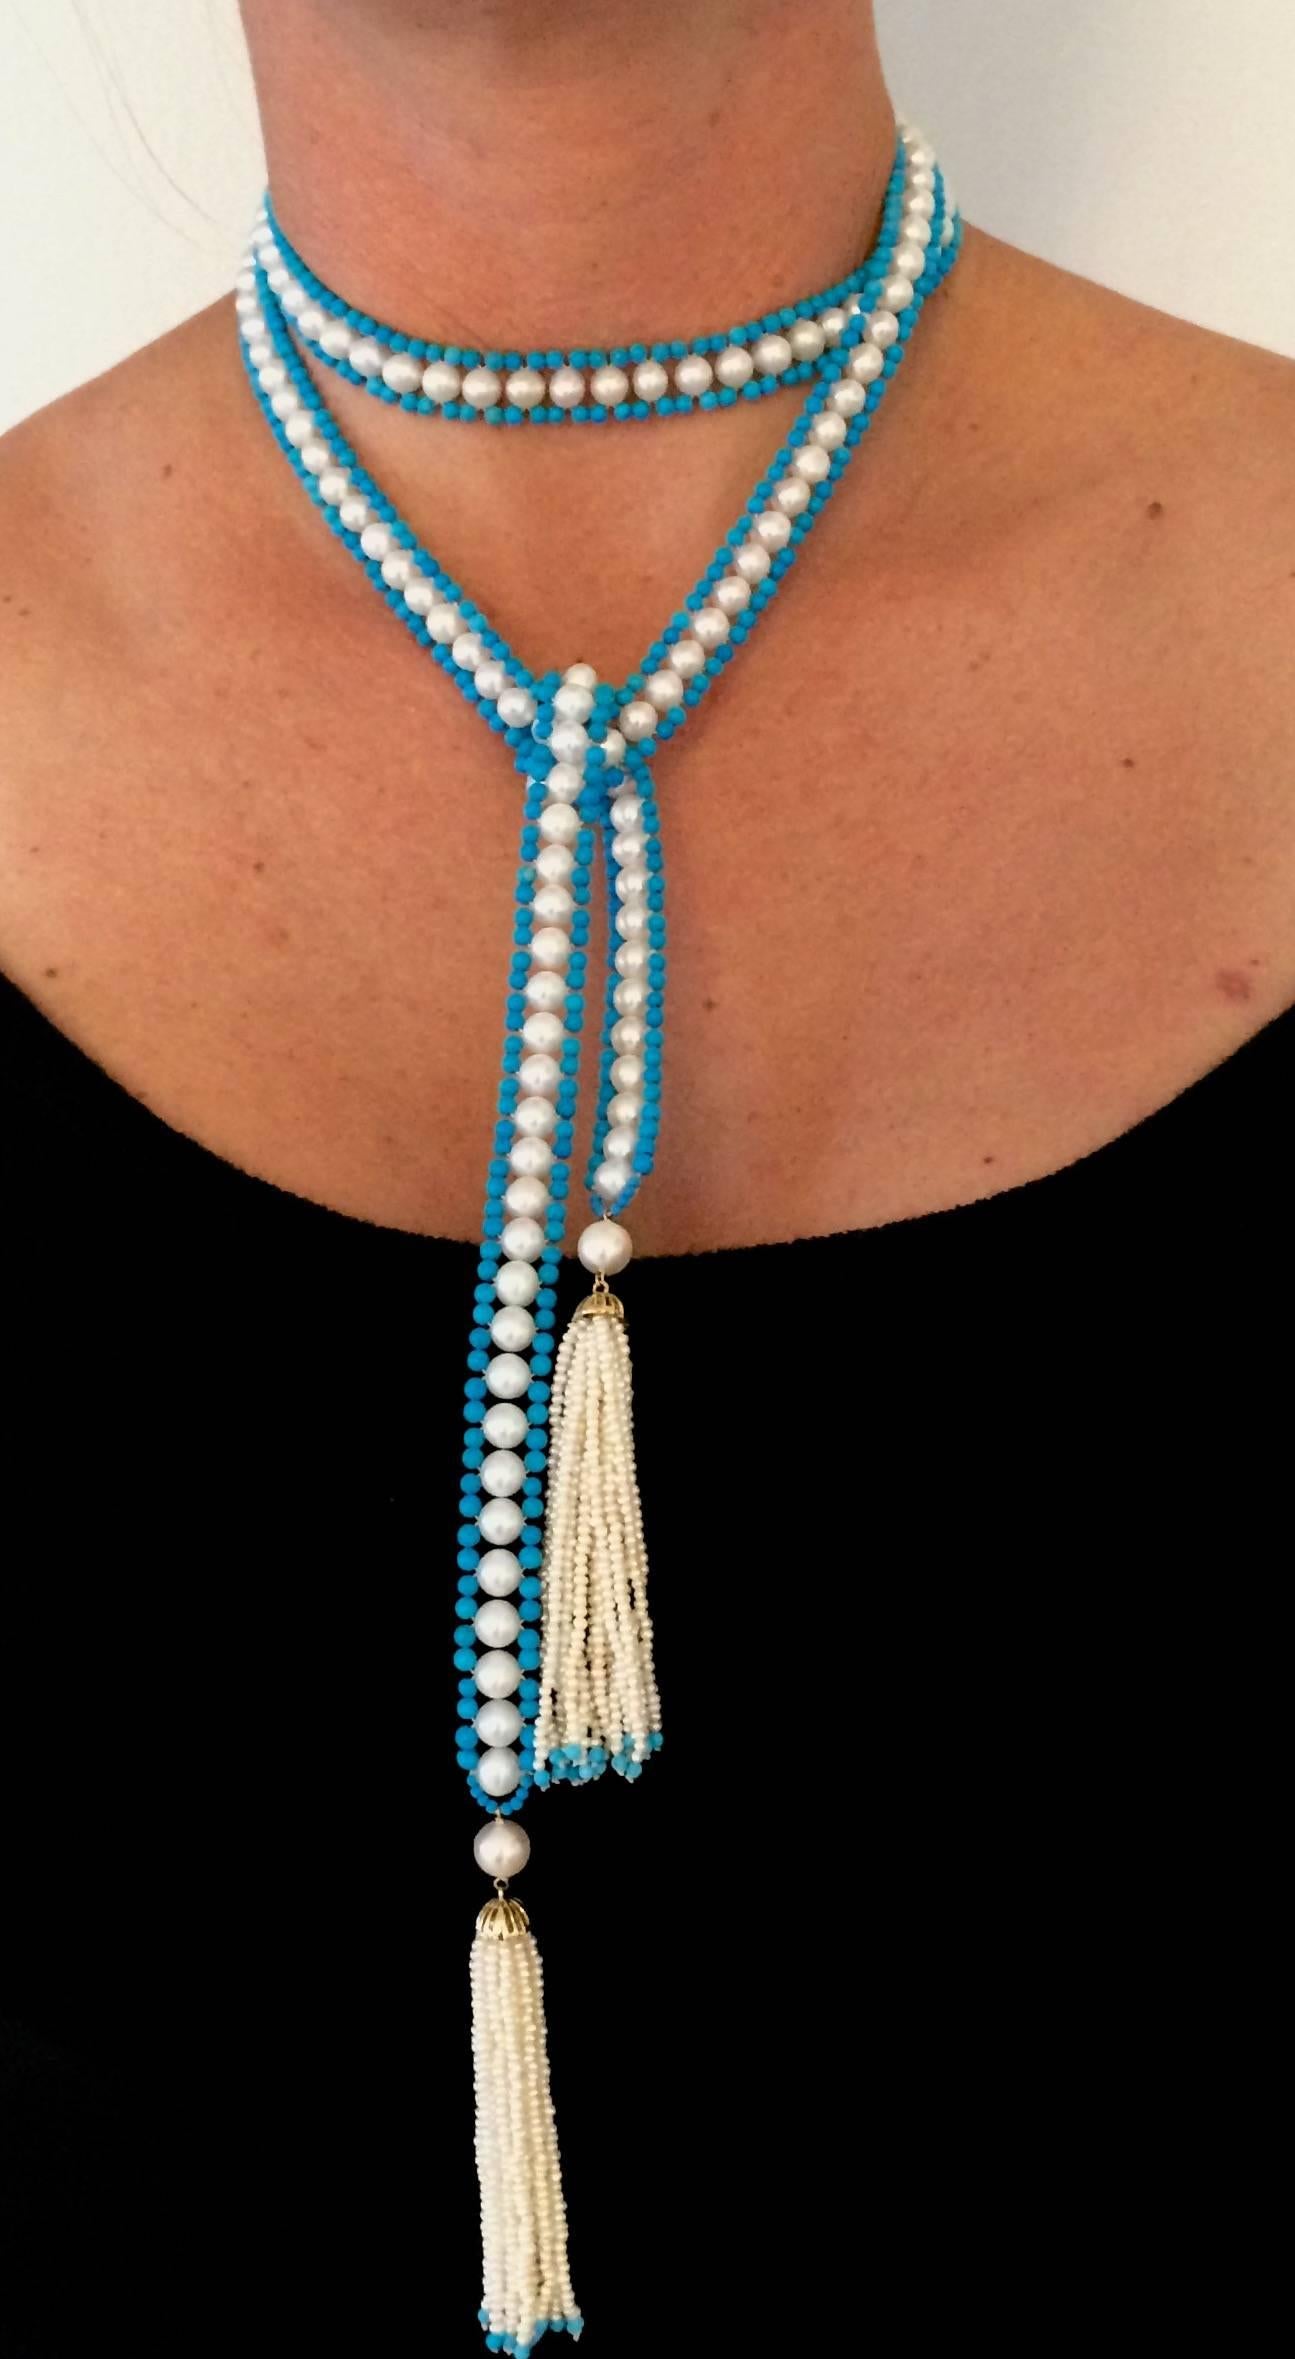  Marina J Woven Pearl & Turquoise Bead Long Sautoir with Pearl and Gold Tassels  For Sale 1